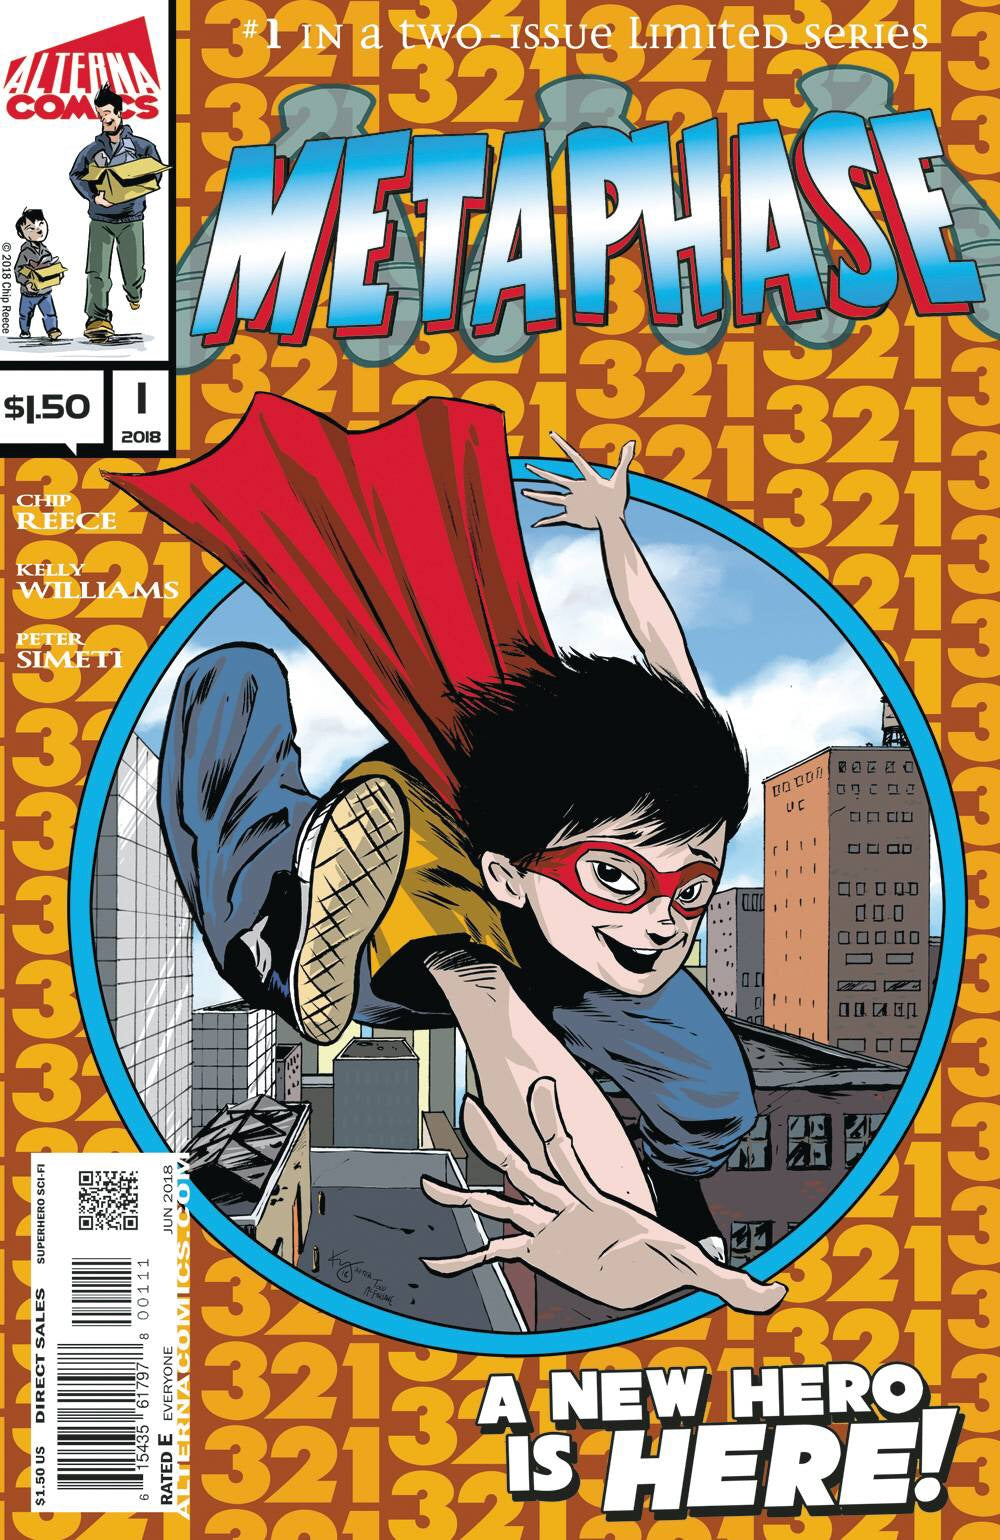 METAPHASE #1 (OF 2) ASM300 COVER SWIPE (ADVANCE ORDER)